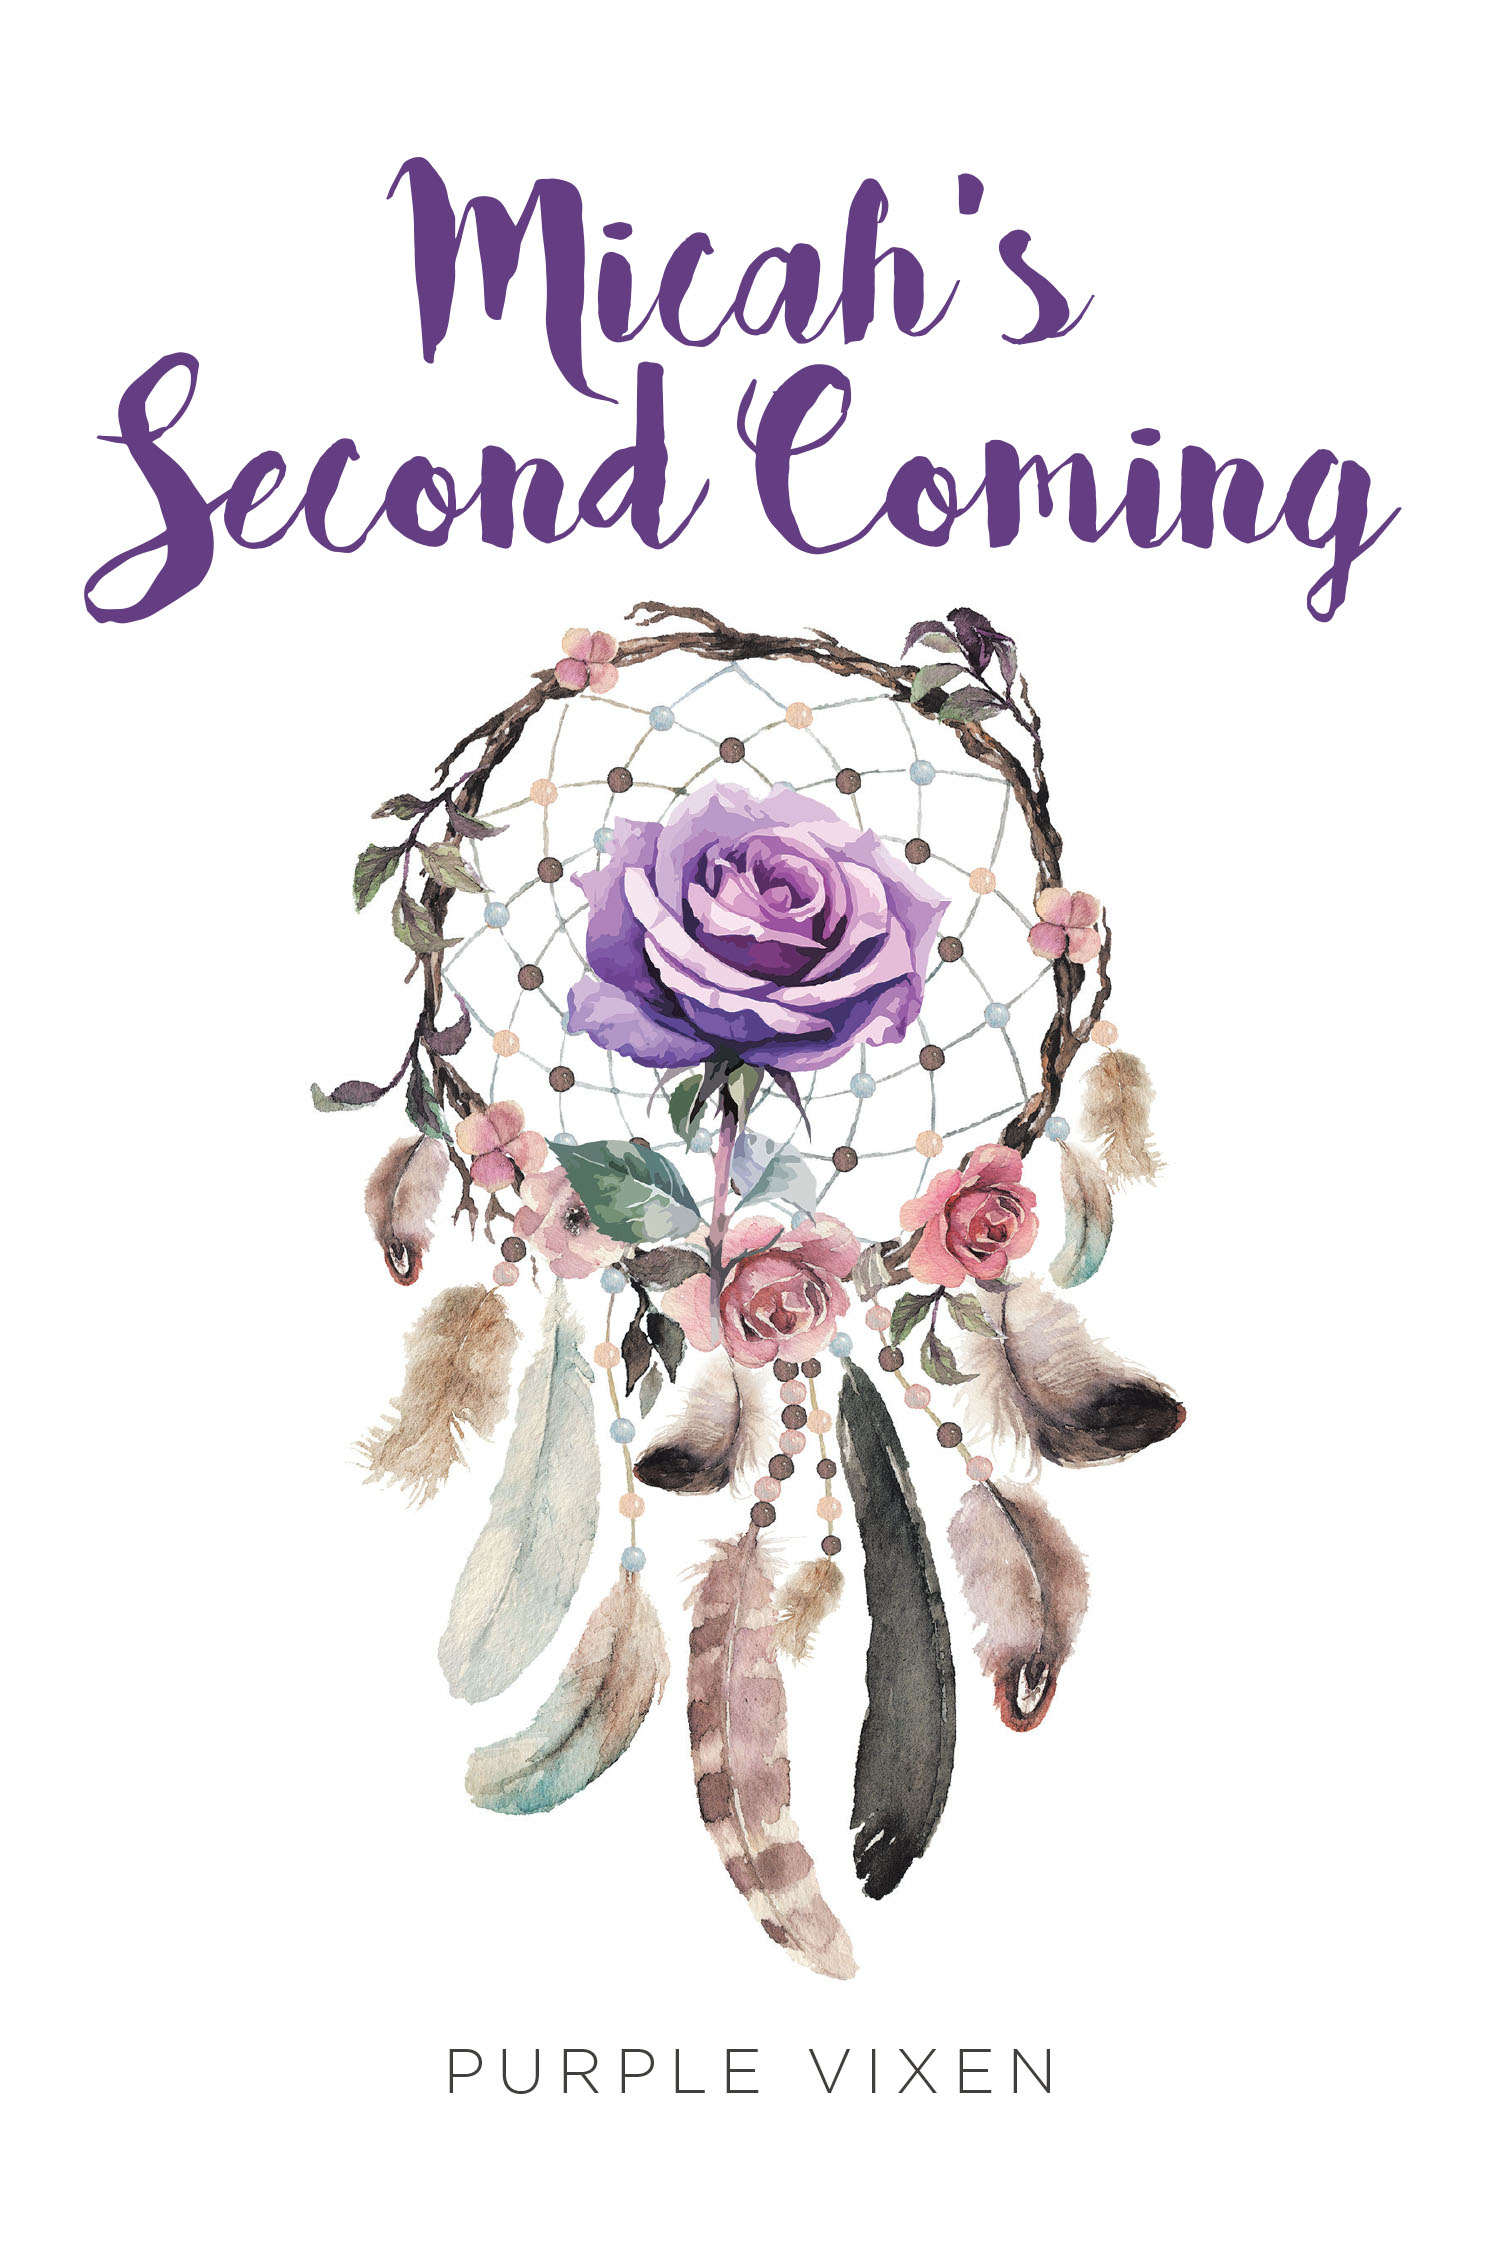 Purple Vixen’s New Book, "Micah's Second Coming," is a Diverse Collection of Poetry That Promises to Uplift, Inspire, and Transport Readers to Realms of Imagination